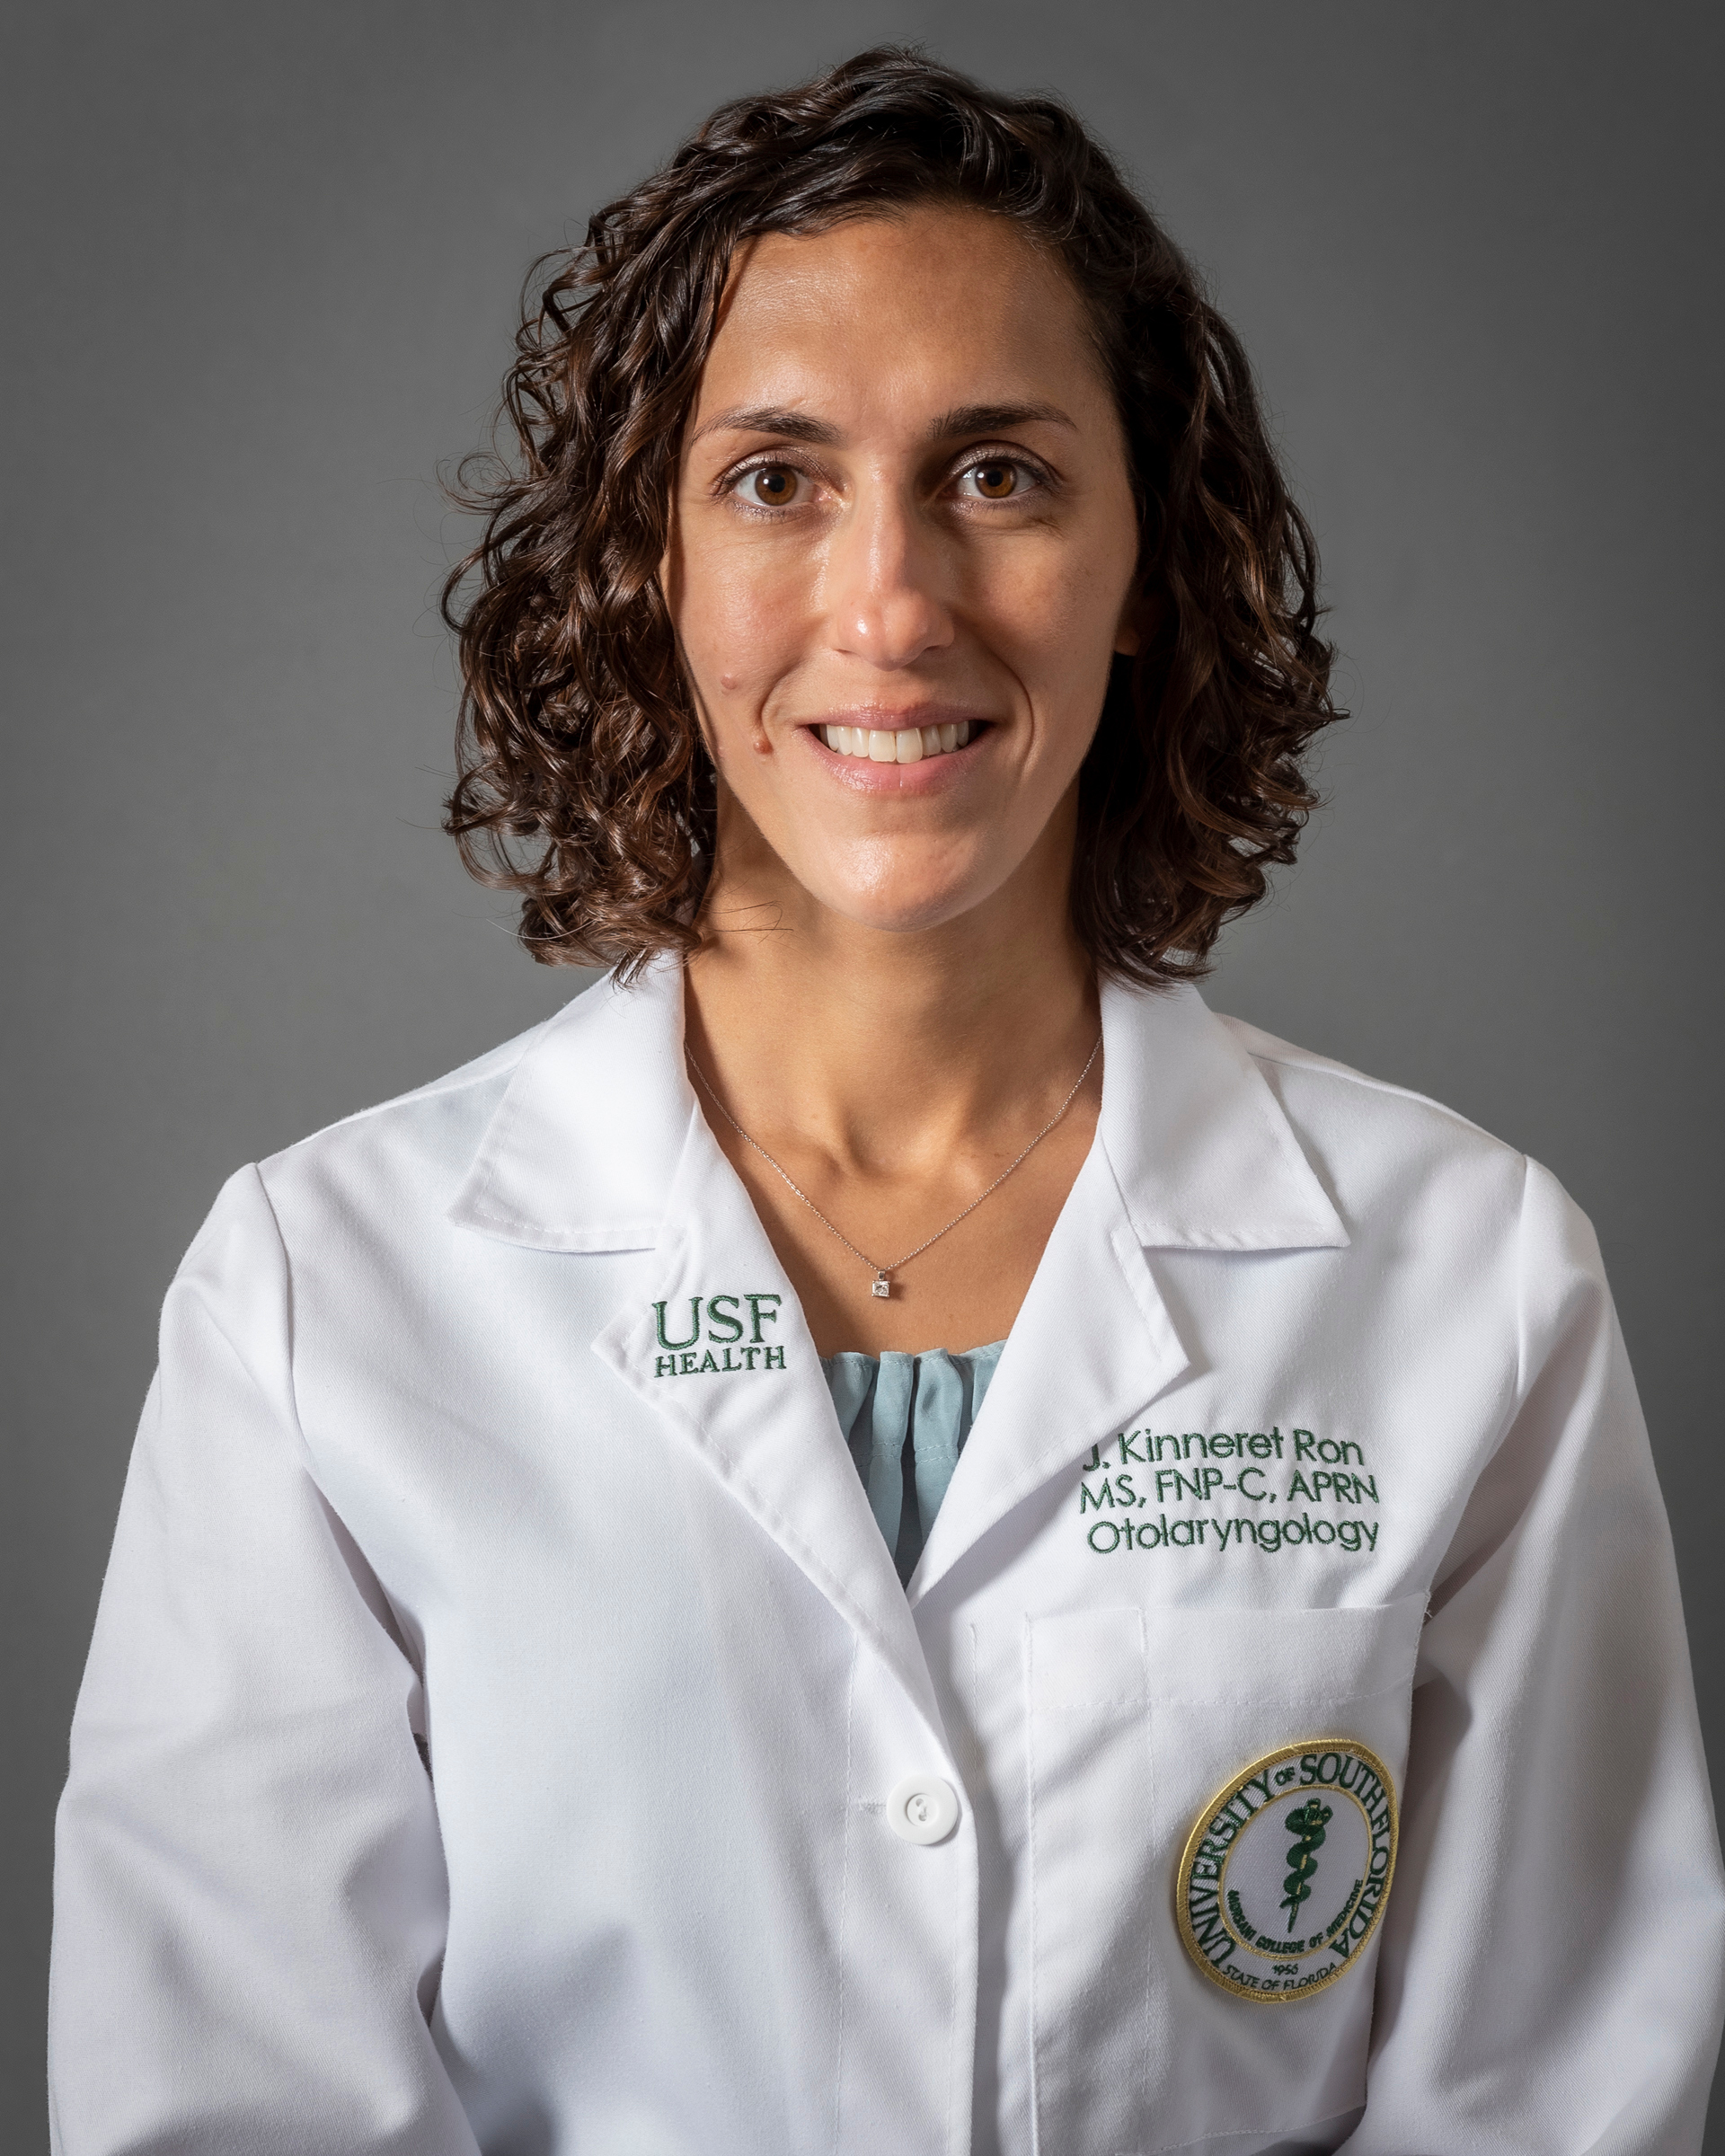 Profile Picture of J. Kinneret Ron, MS, FNP-C APRN